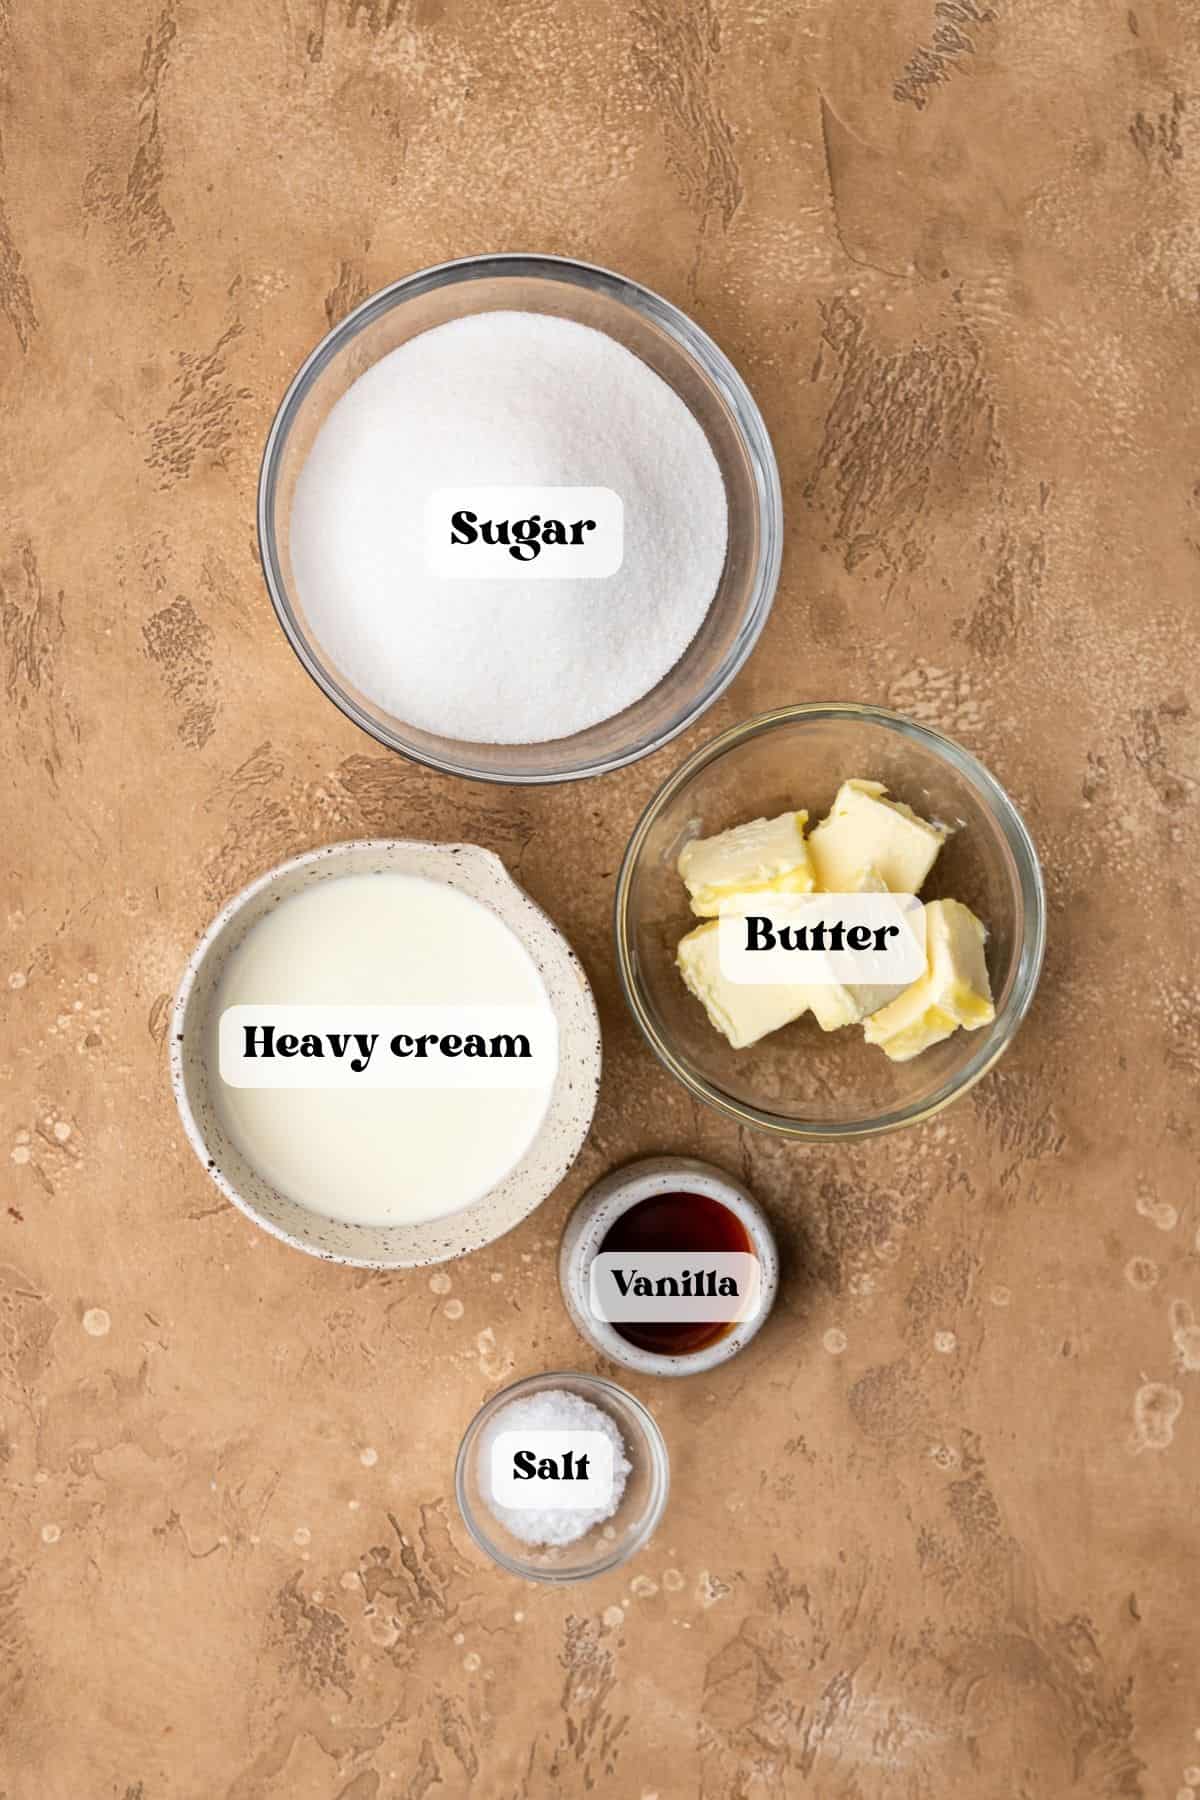 Ingredients to make salted caramel on a beige surface.